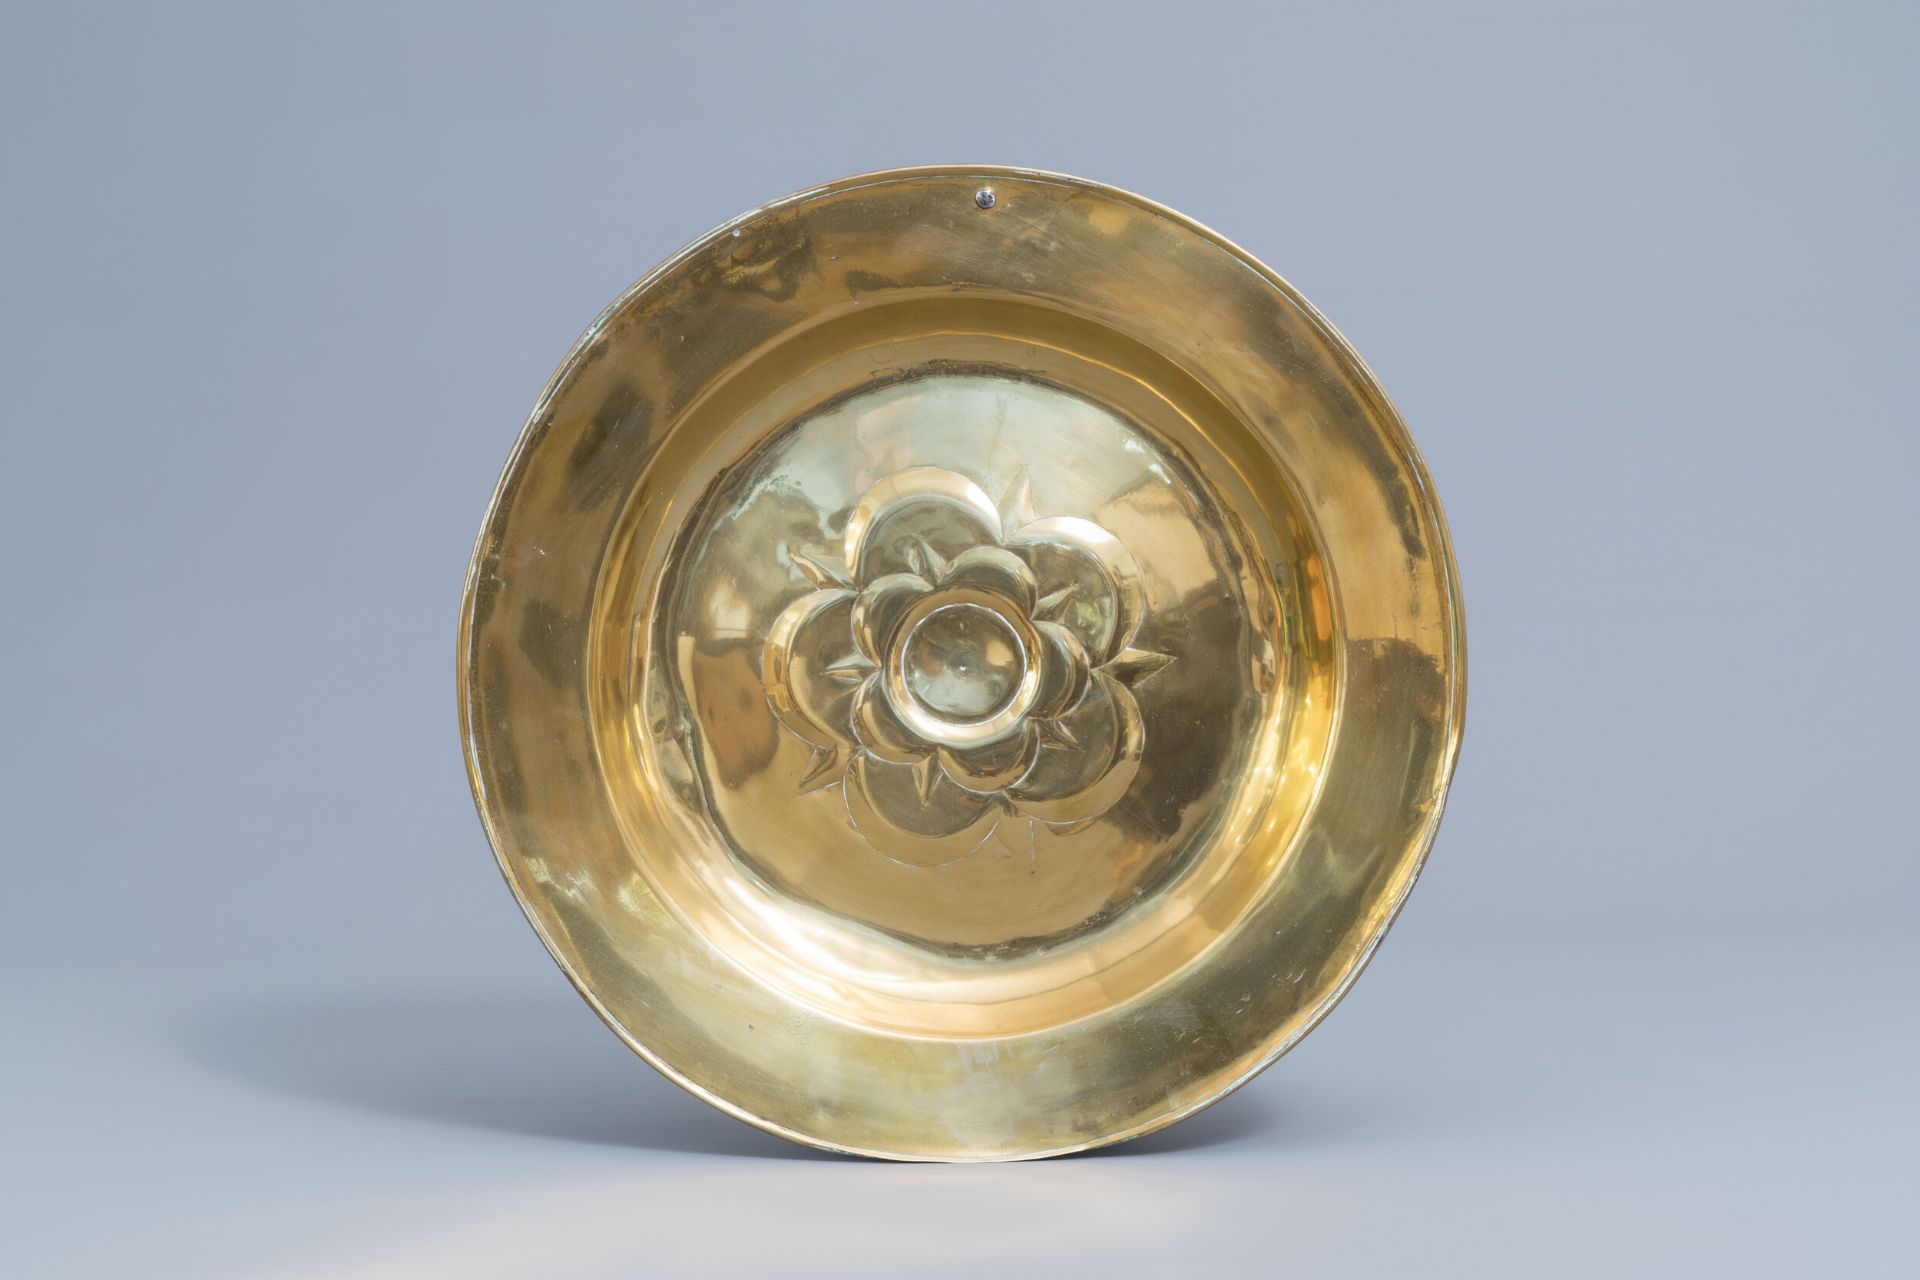 A large German brass alms dish with floral design, possibly 17th C.